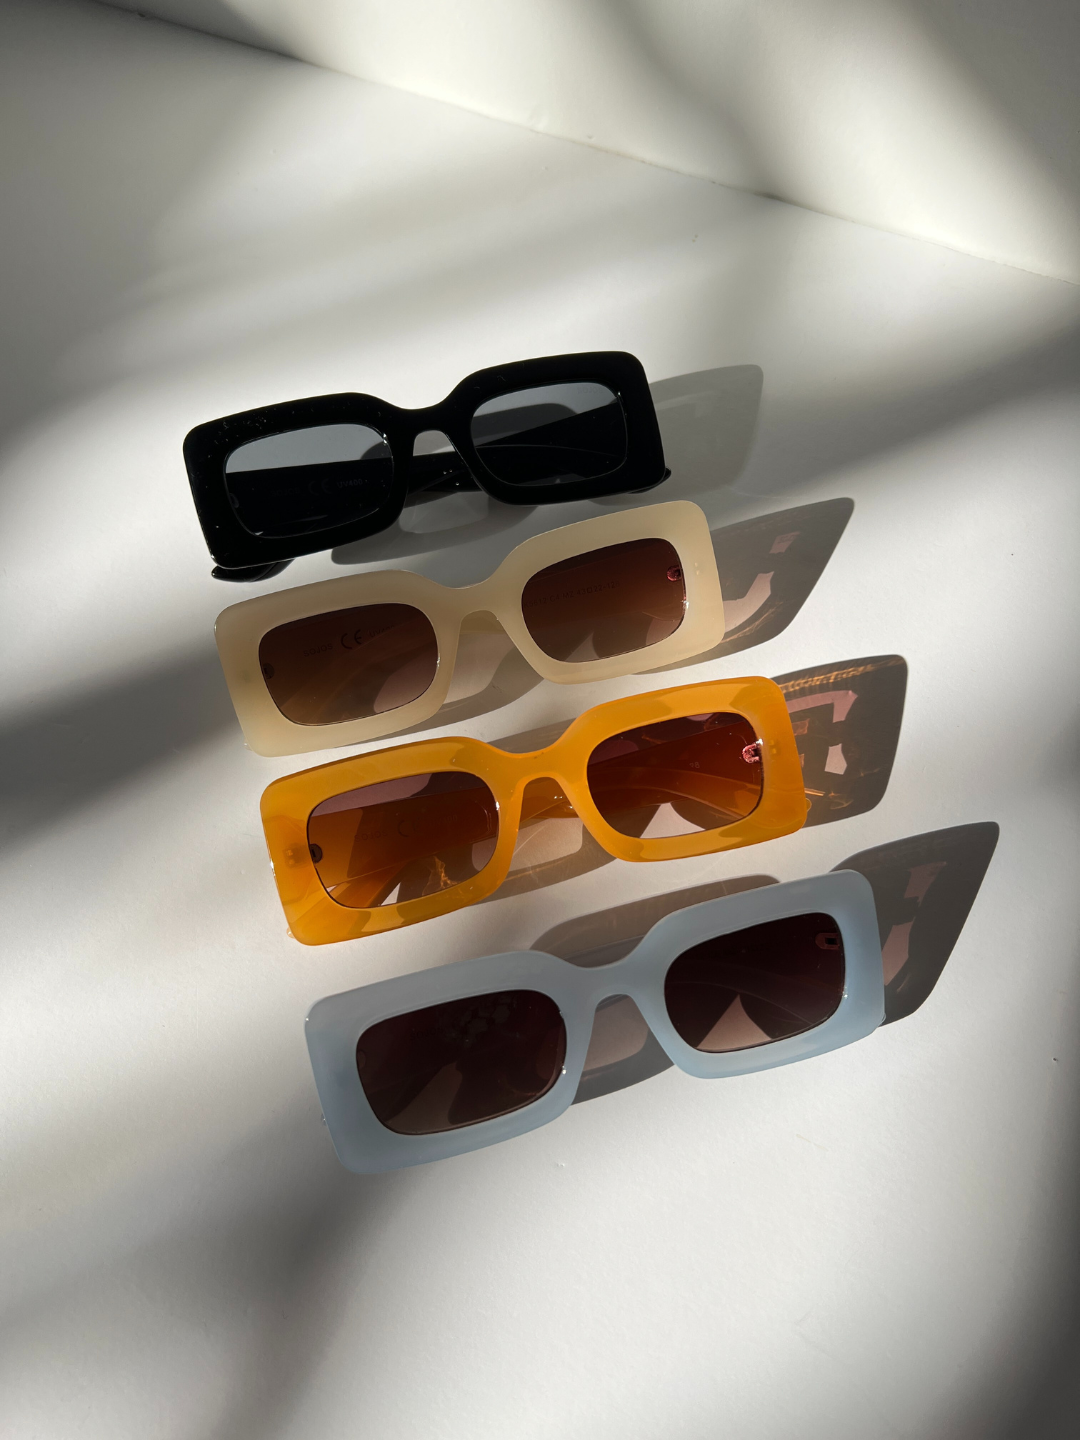 Blue | Group of kids rectangle sunglasses in black, blue, orange and cream, lined up diagonally on a white background.